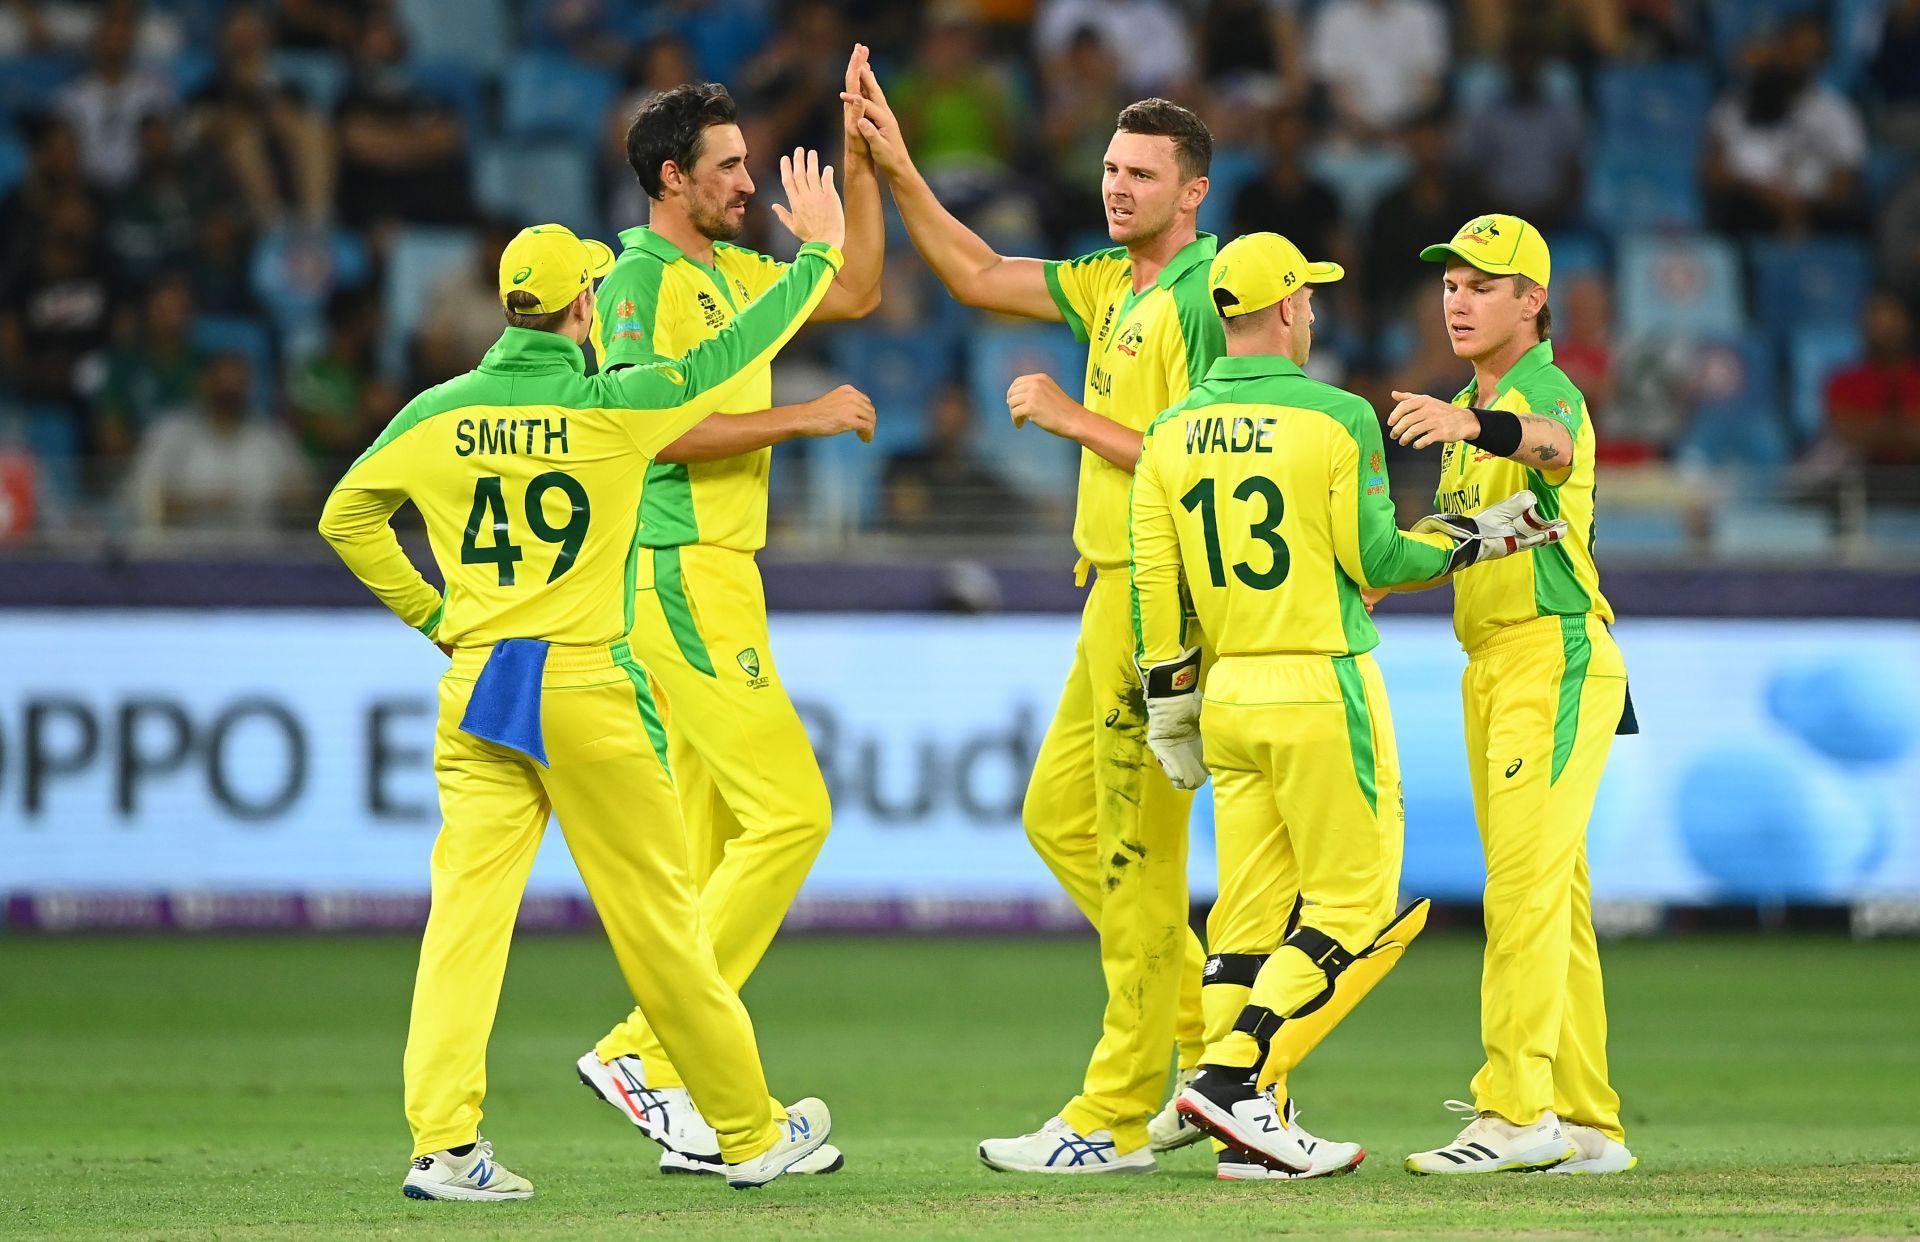 Josh Hazlewood celebrates the wicket of Daryl Mitchell with his teammates. Pic: Getty Images